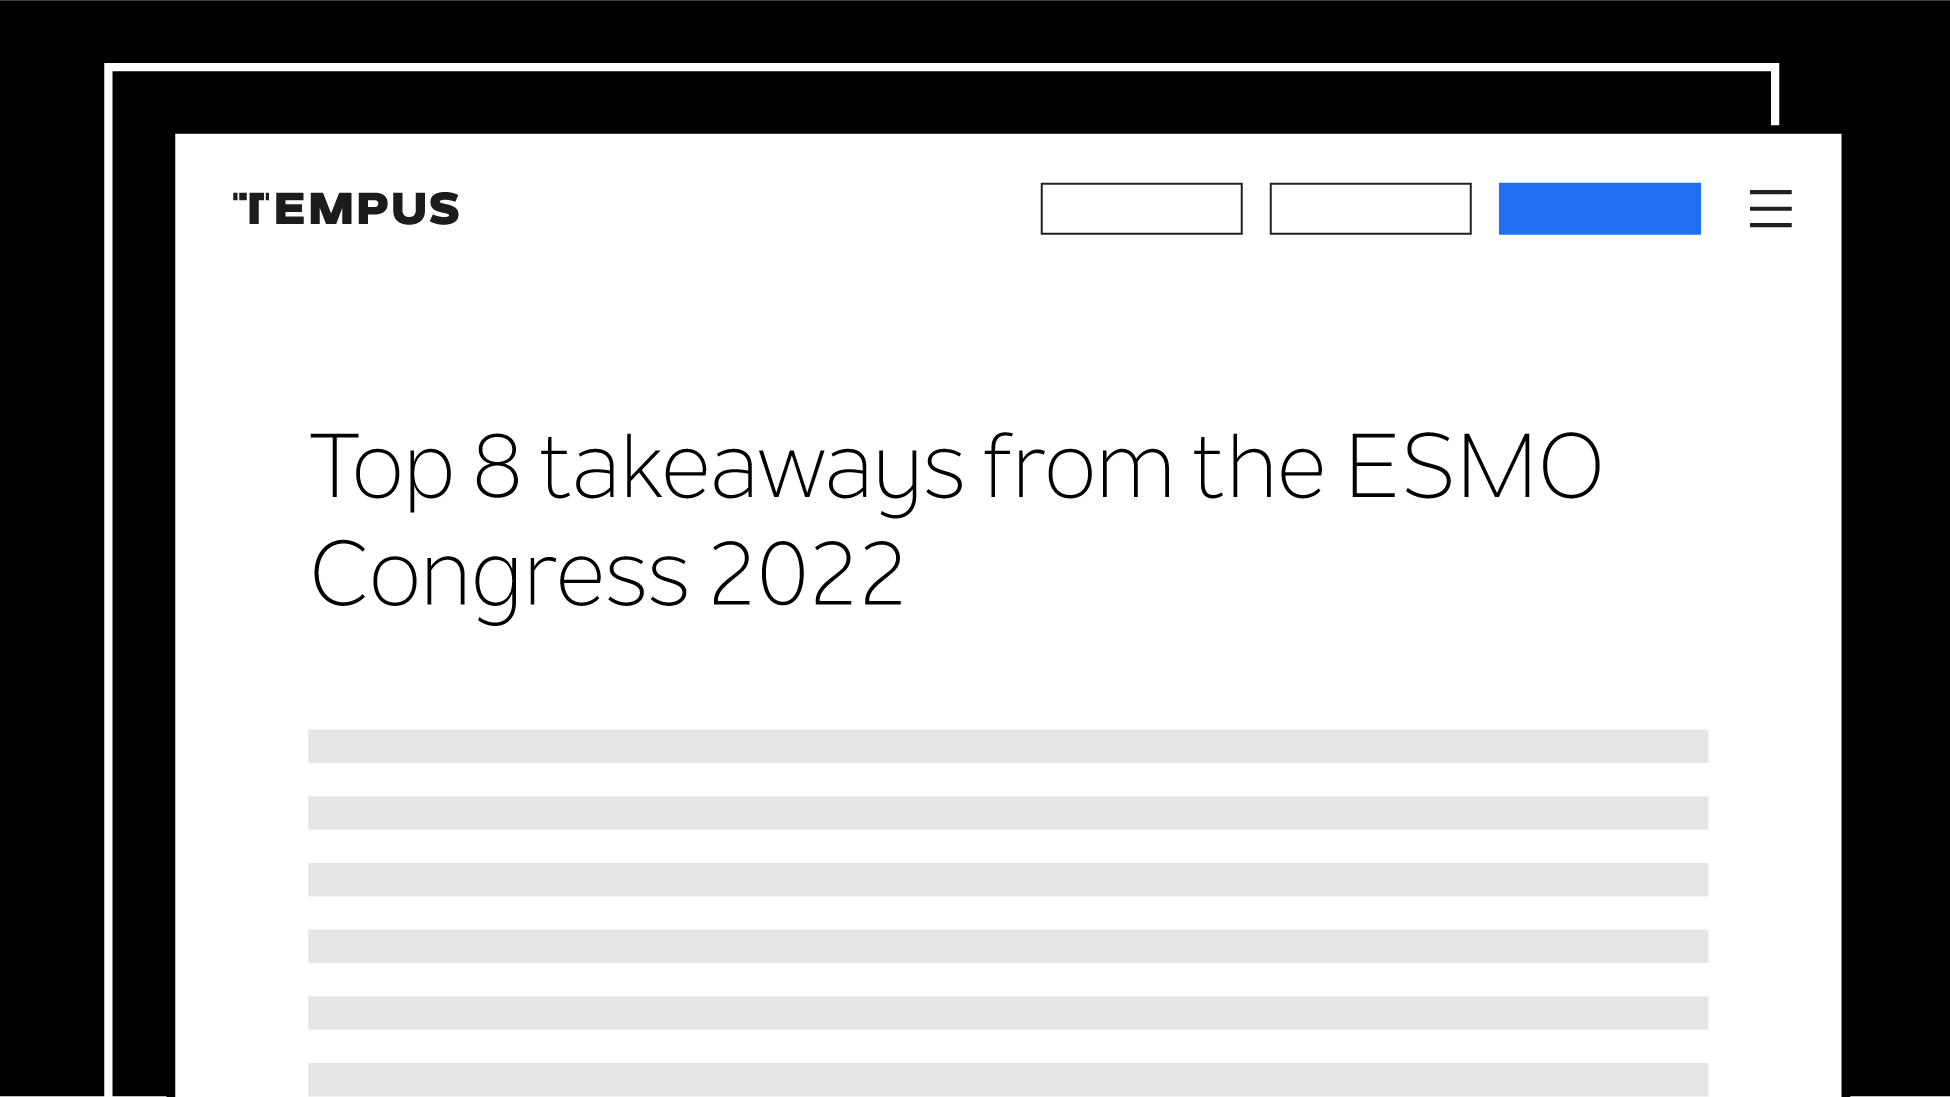 Top 8 takeaways from the ESMO Congress 2022